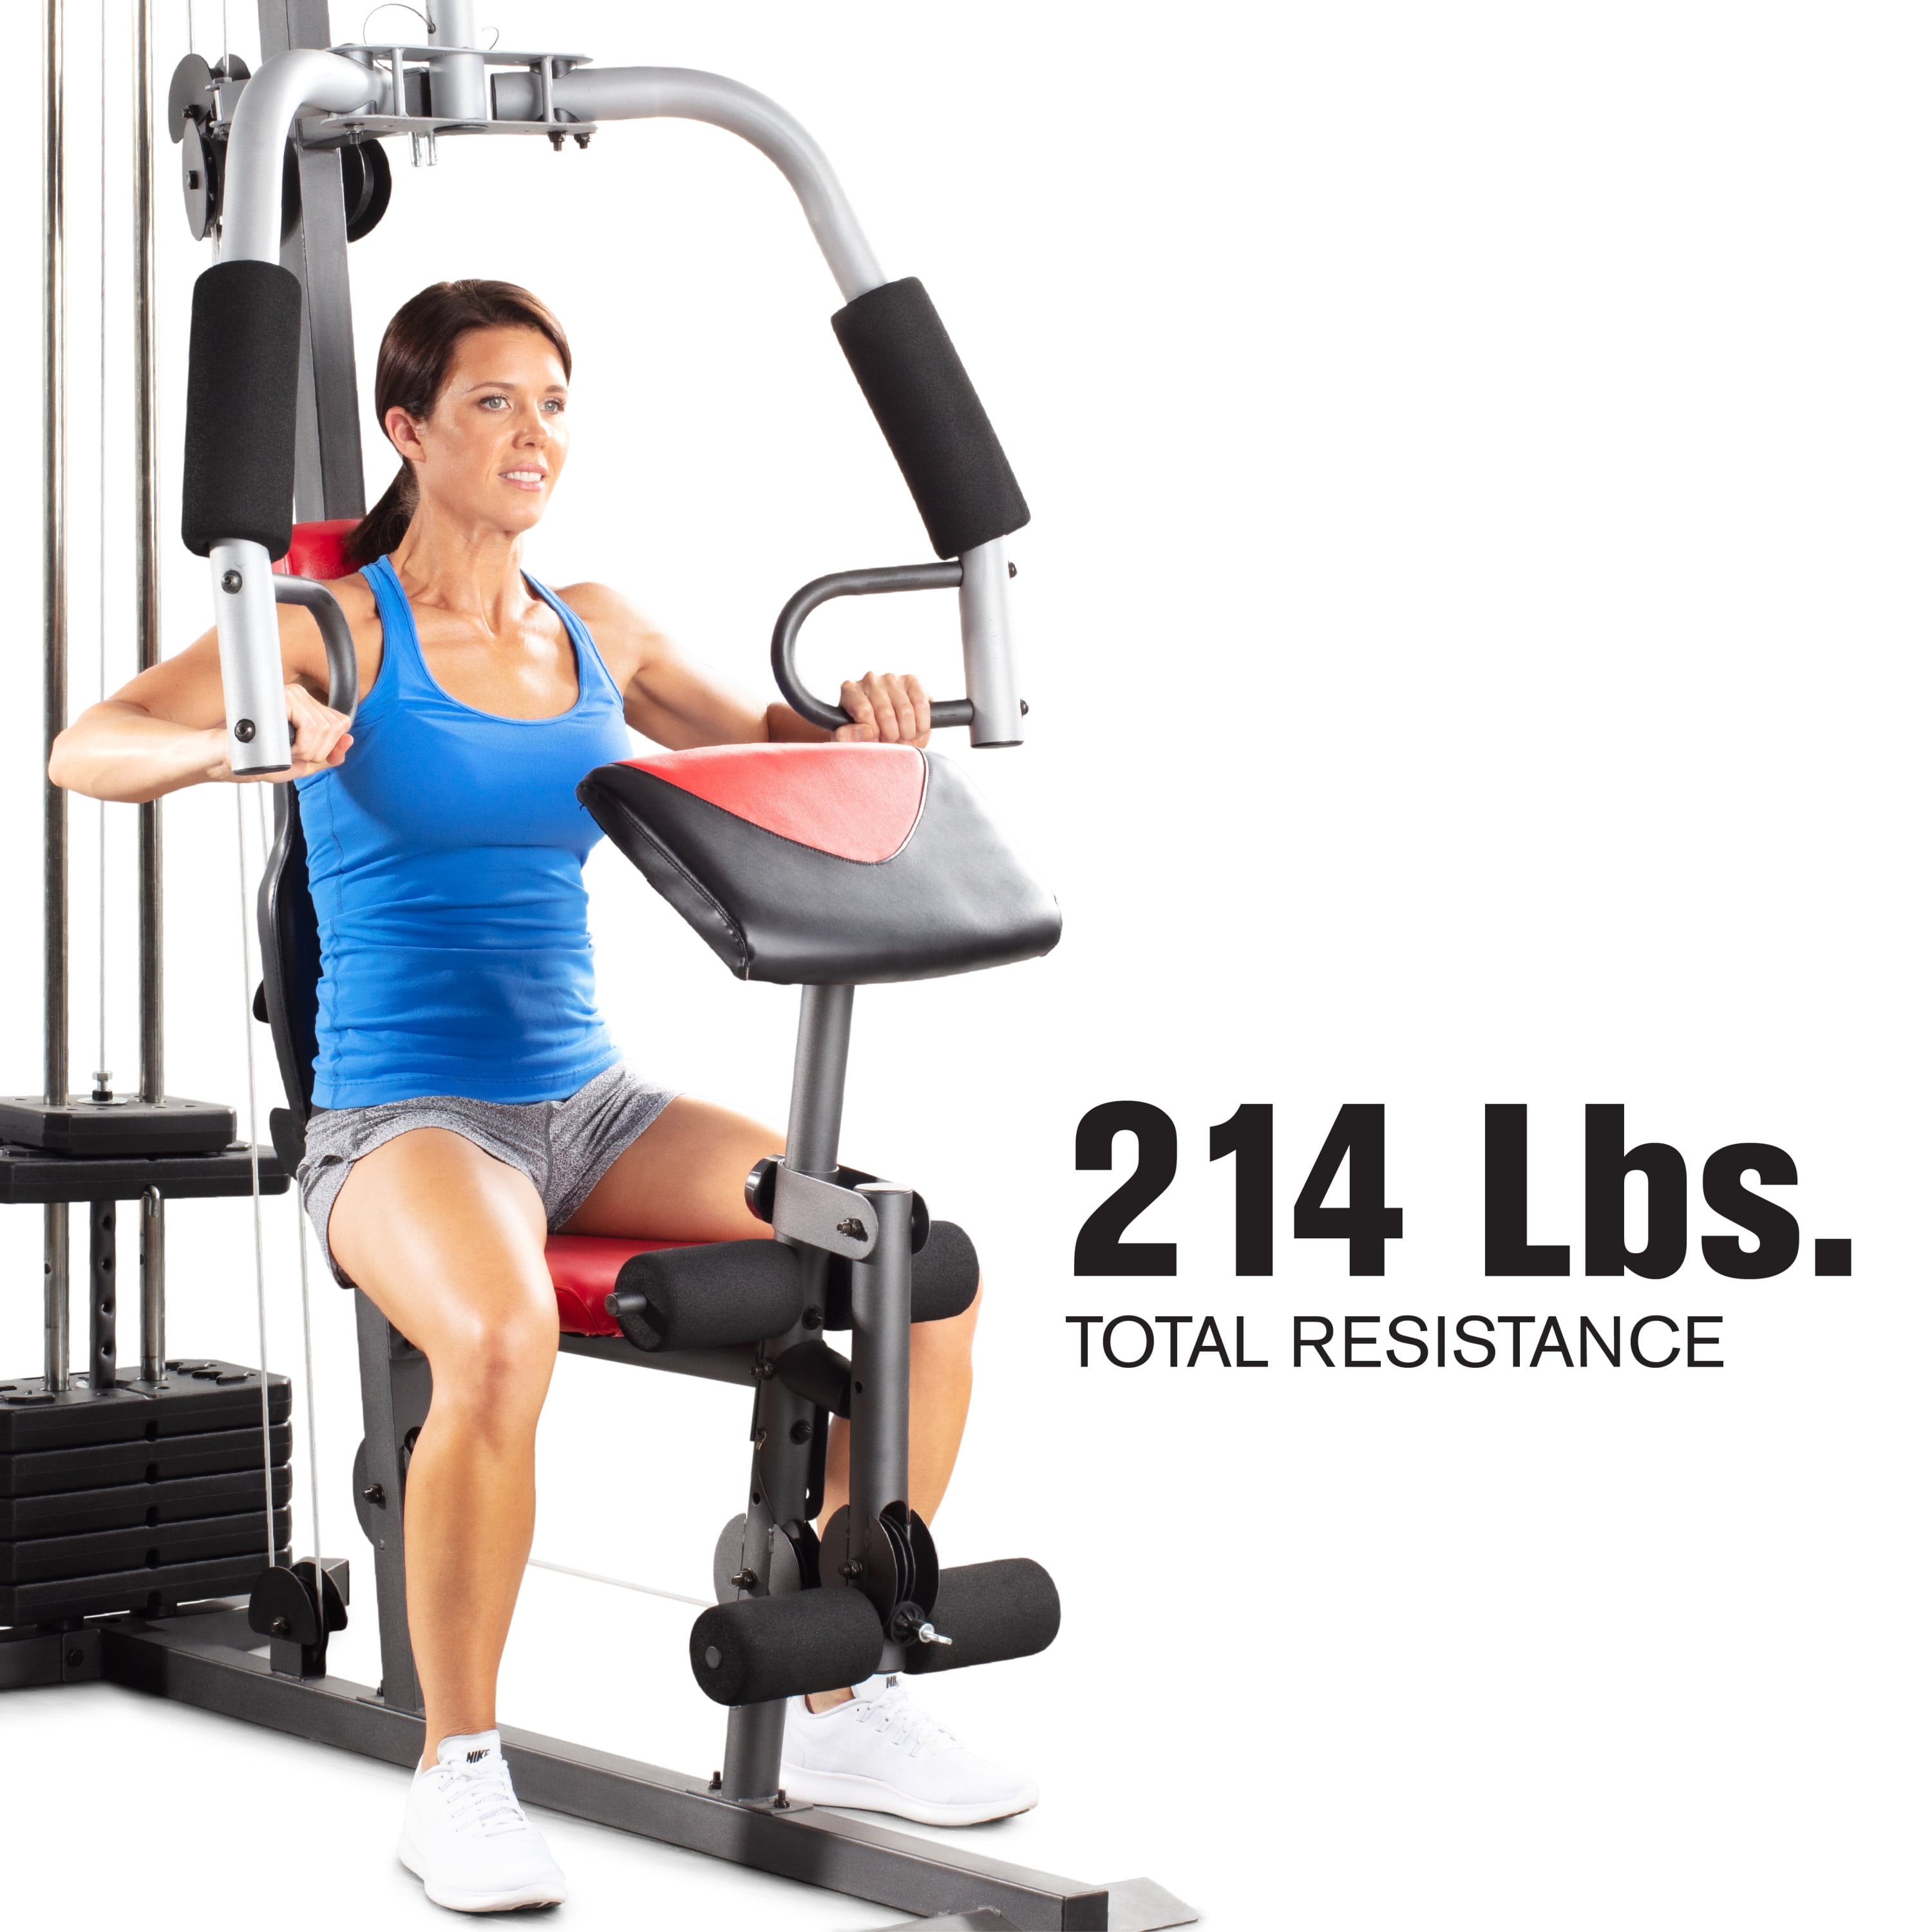 Buy Weider 2980 X Home Gym System With 80 Lb Vinyl Weight Stack Online At Lowest Price In